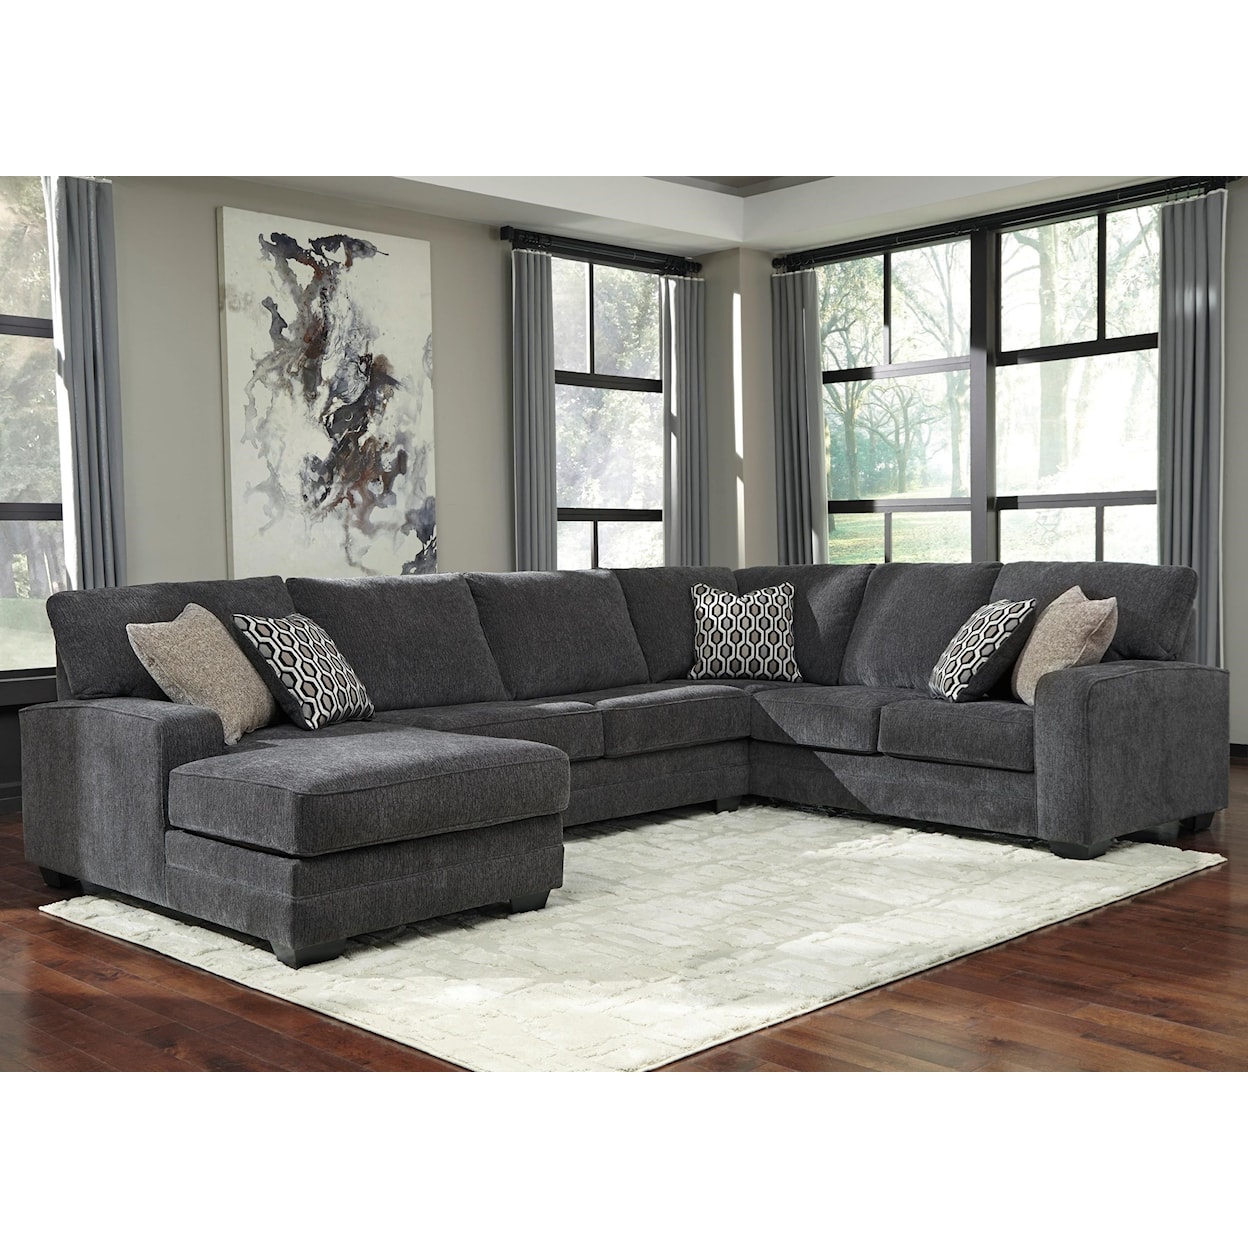 Benchcraft Trace Sectional with Left Chaise